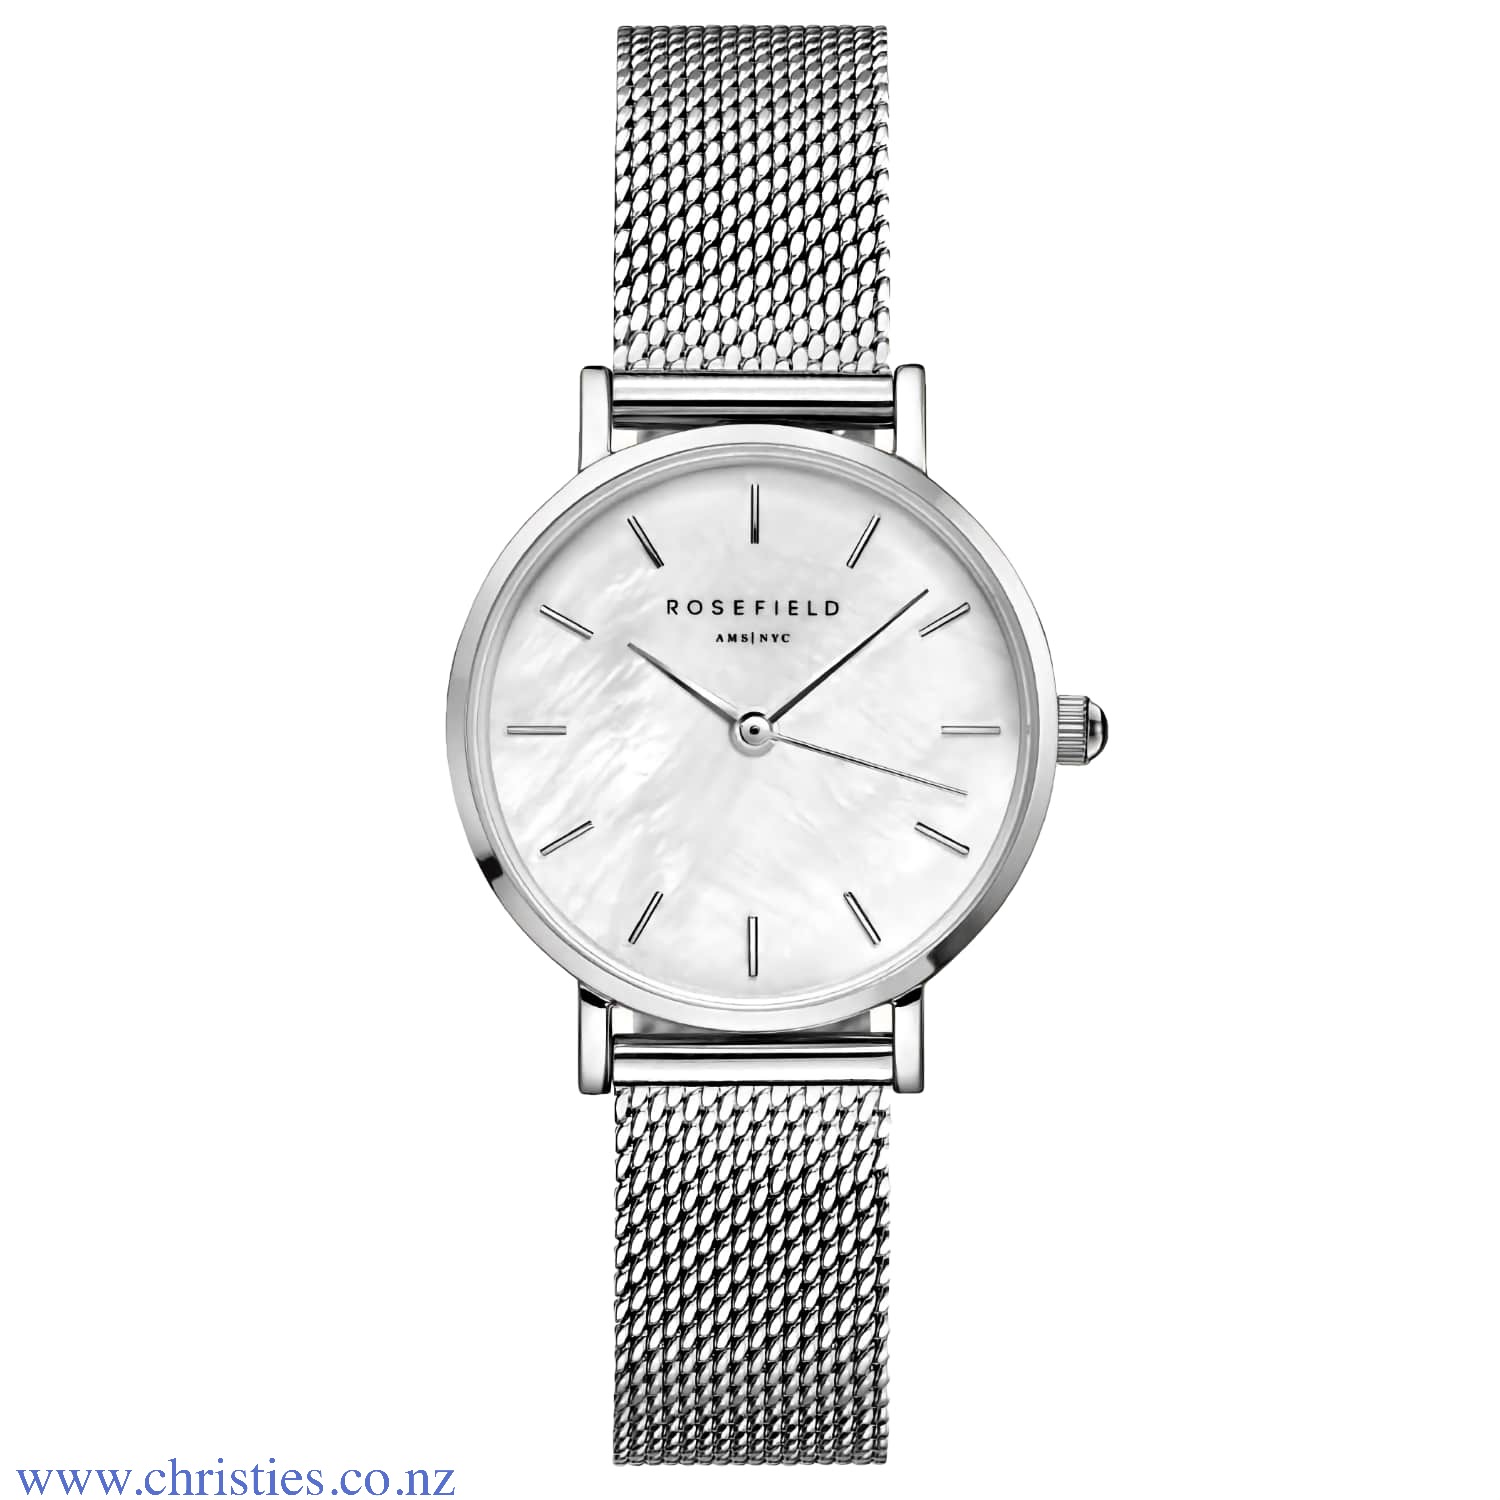 26WS-266 Rosefield The Small Edit White Silver Watch. The Small Edit collection reinvents a classic style for a new era. With a 26mm case, it's one of Rosefield's smallest designs. Afterpay - Split your purchase into 4 instalments - Pay for your purchase 